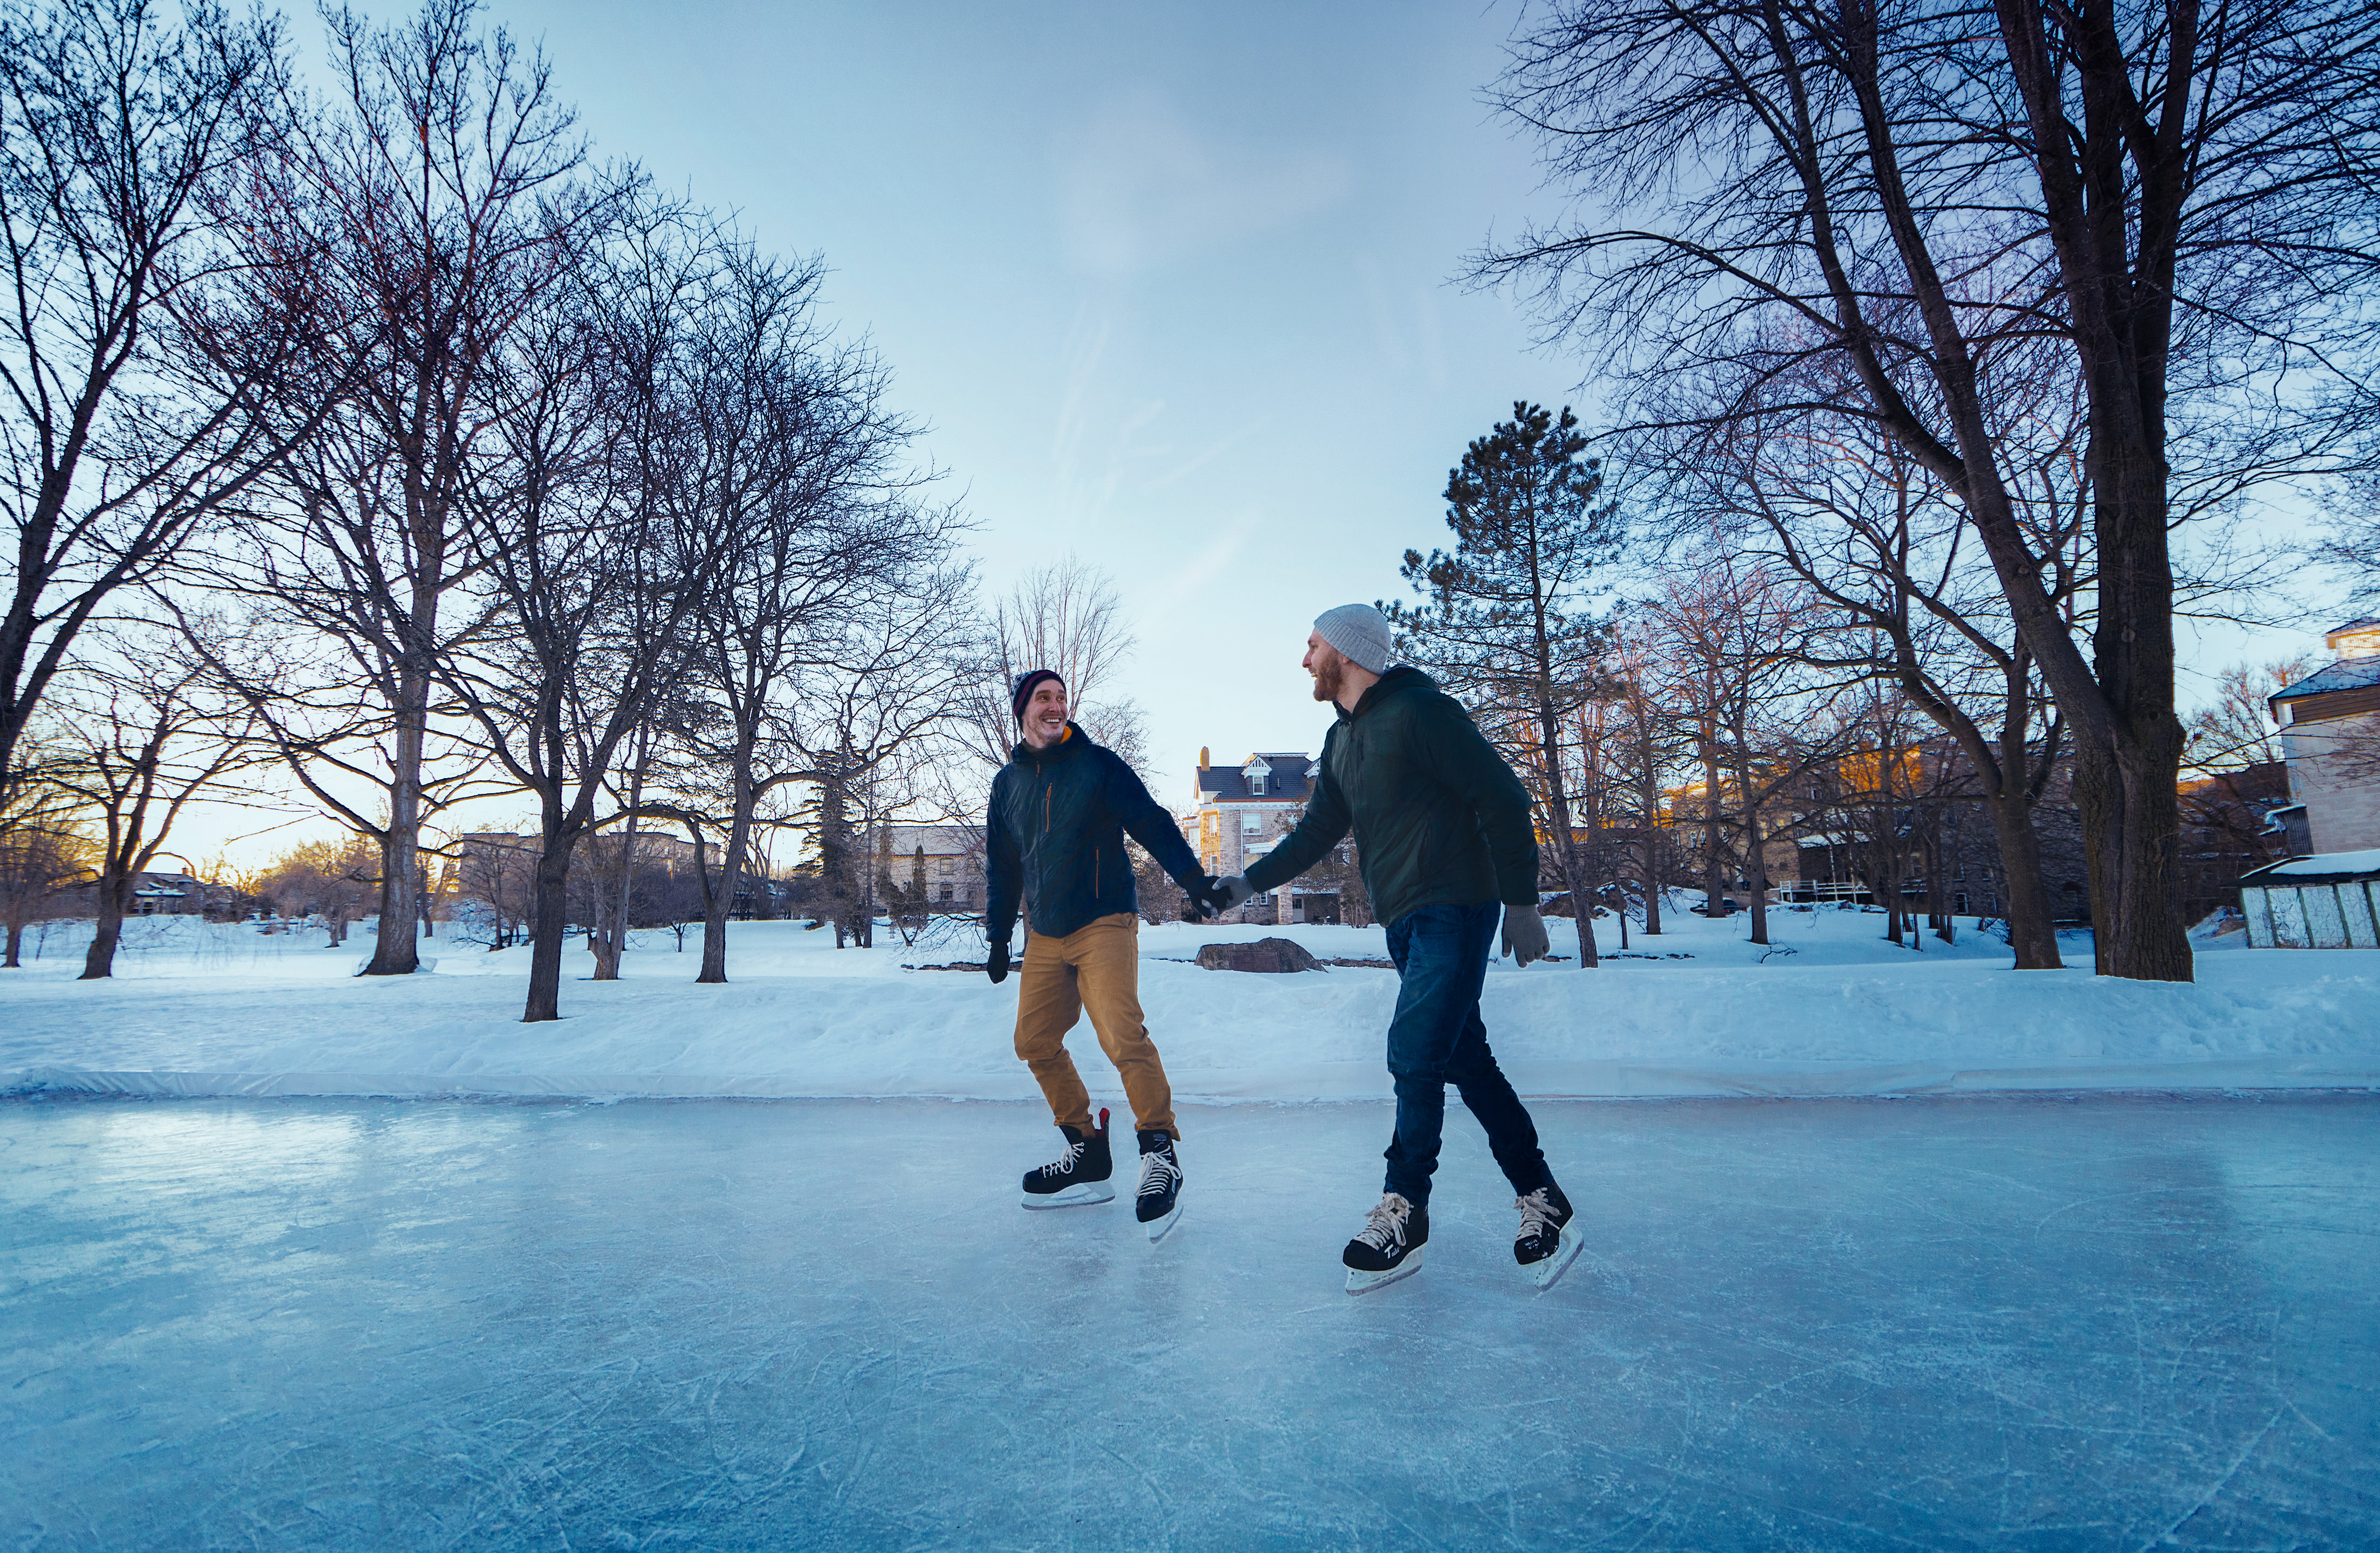 CommercialPhotographer Matthew Liteplo , from Ottawa, shot this for a tourism campaign in Perth Ontario. 